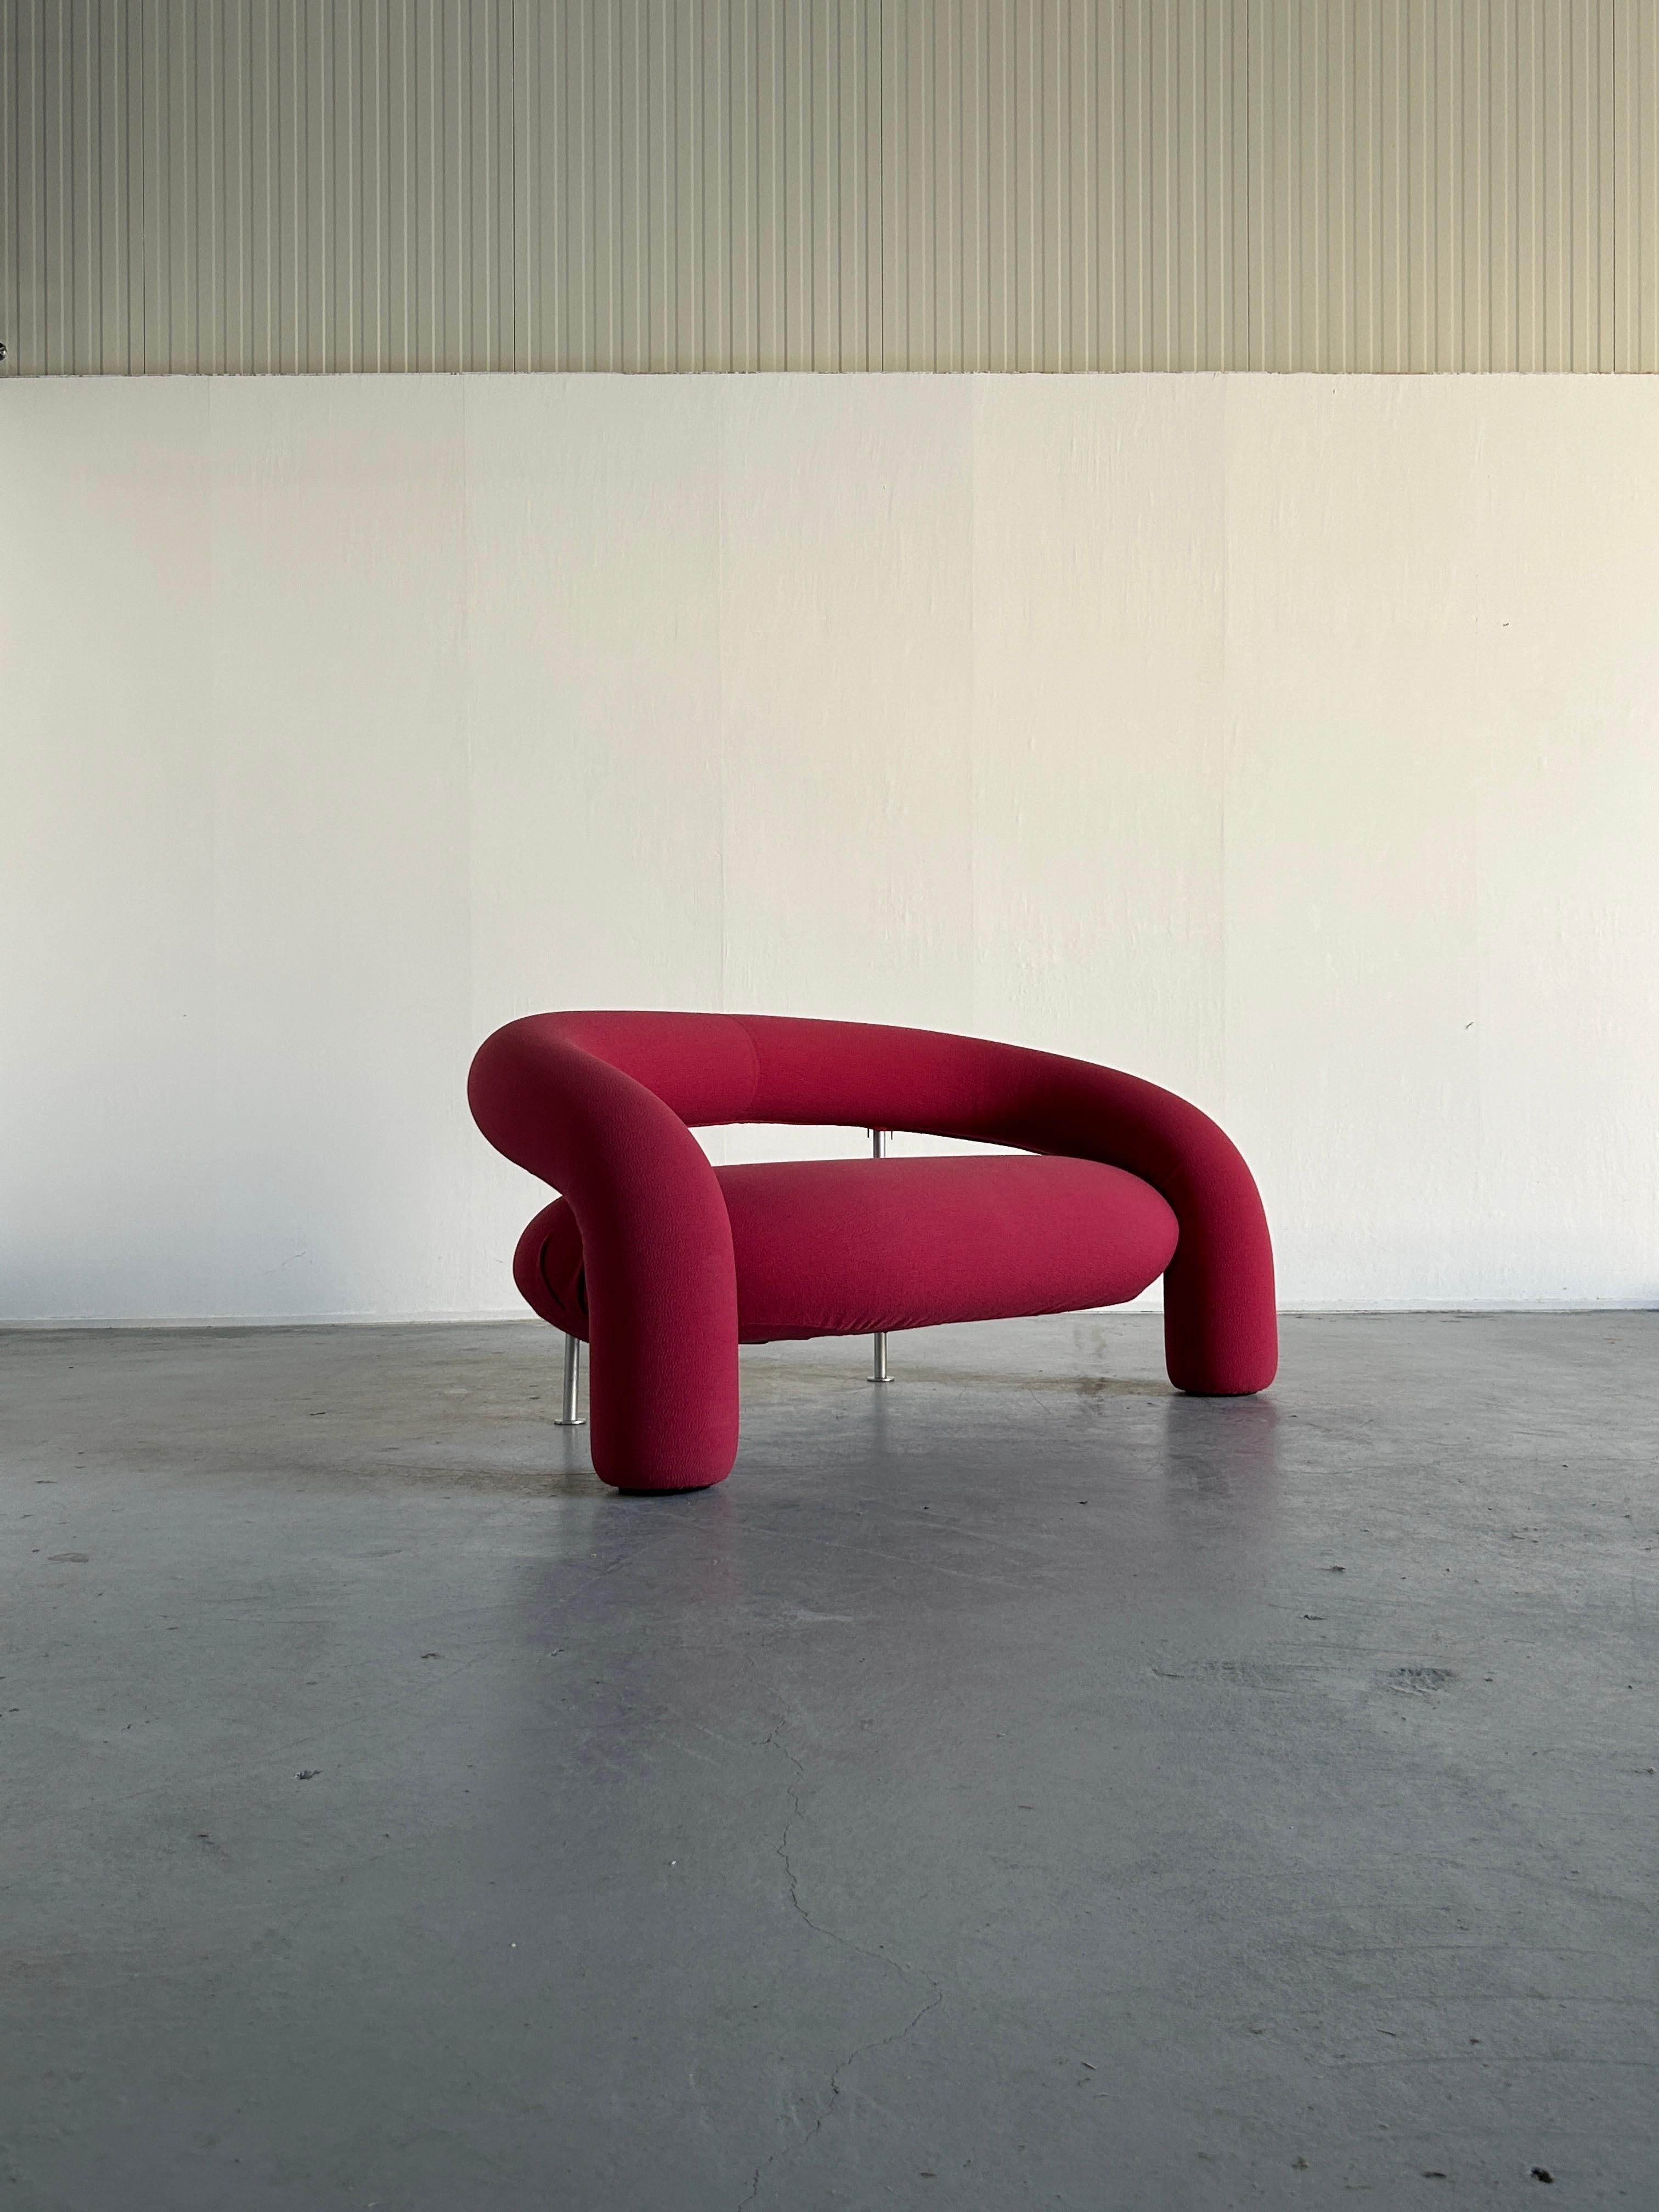 Rare sculptural postmodern designer sofa model ''Tube'' designed by Anna & Carlo Bartoli for Italian high-end furniture manufacturer Rossi di Albizzate.

The sofa features internal tubular metal frame, padding in polyurethane foams covered in soft